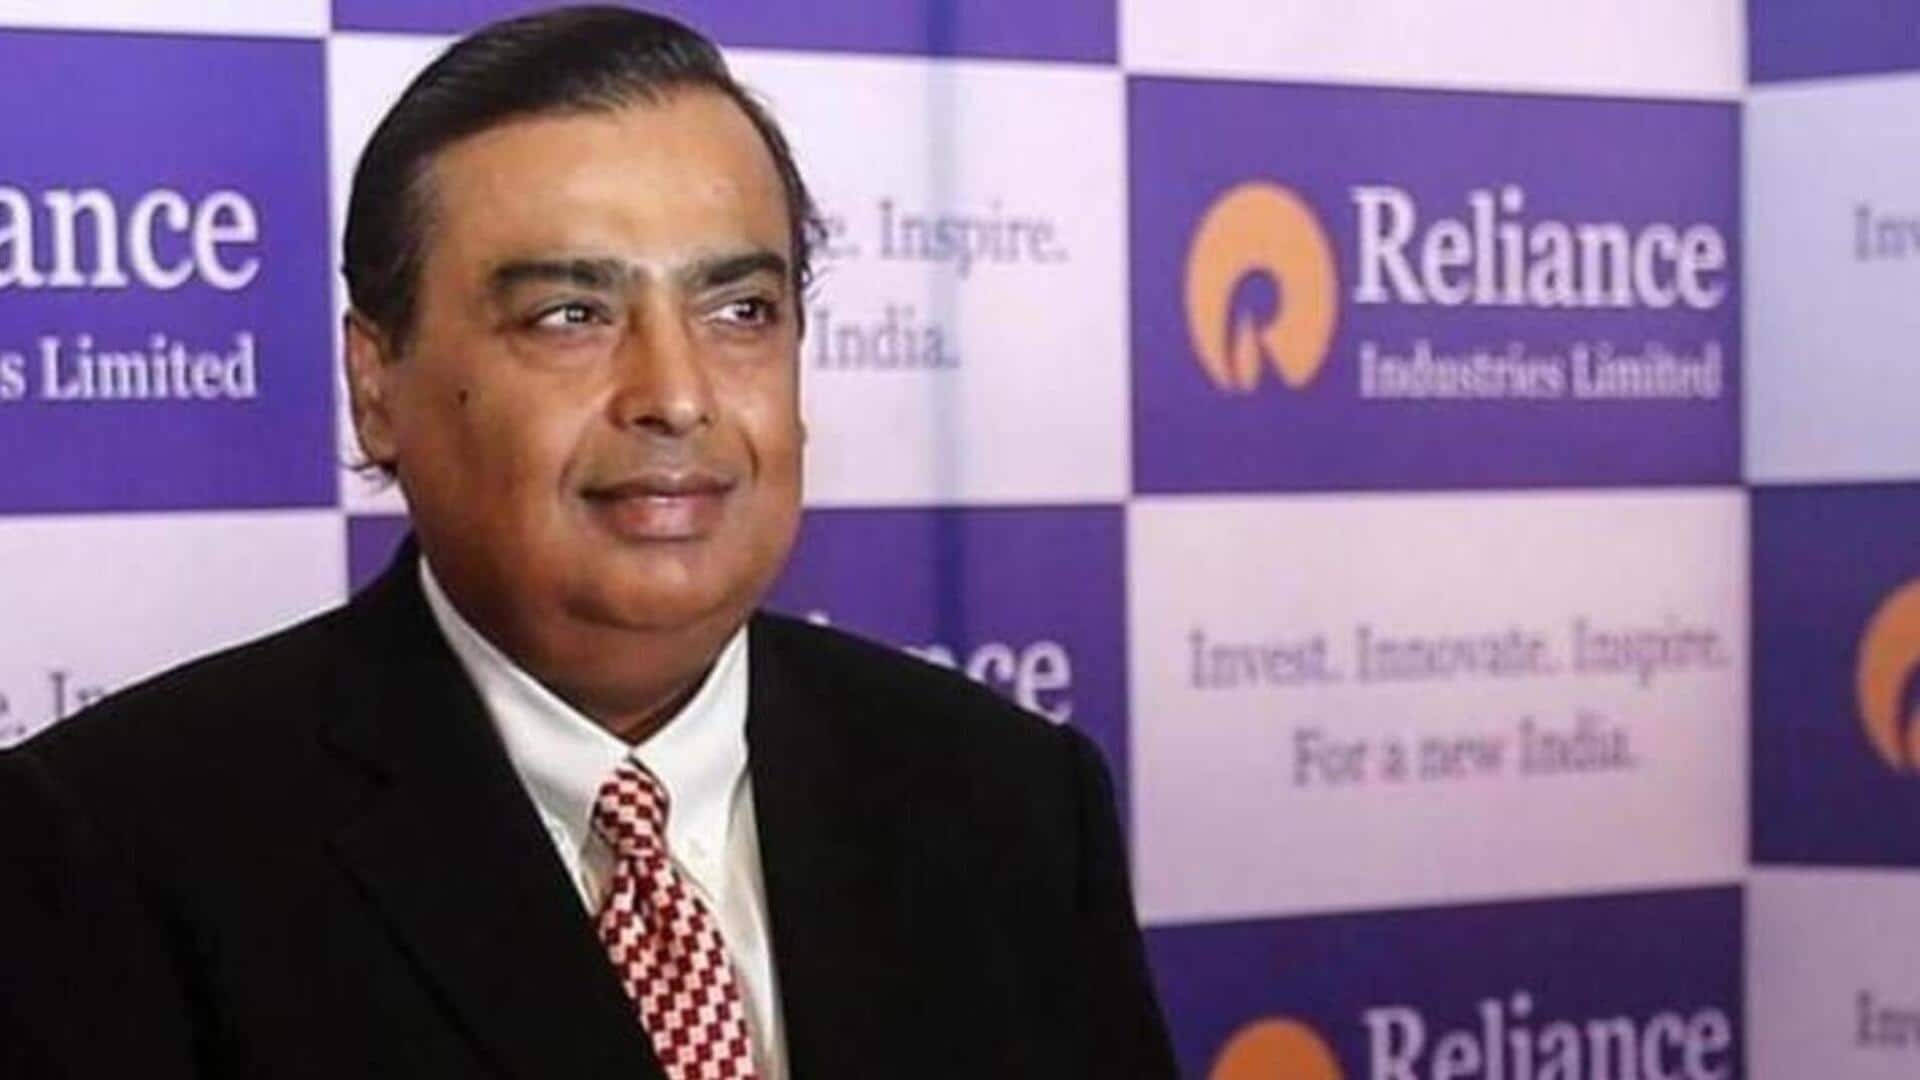 Reliance could rival Paytm and PhonePe with a sound box